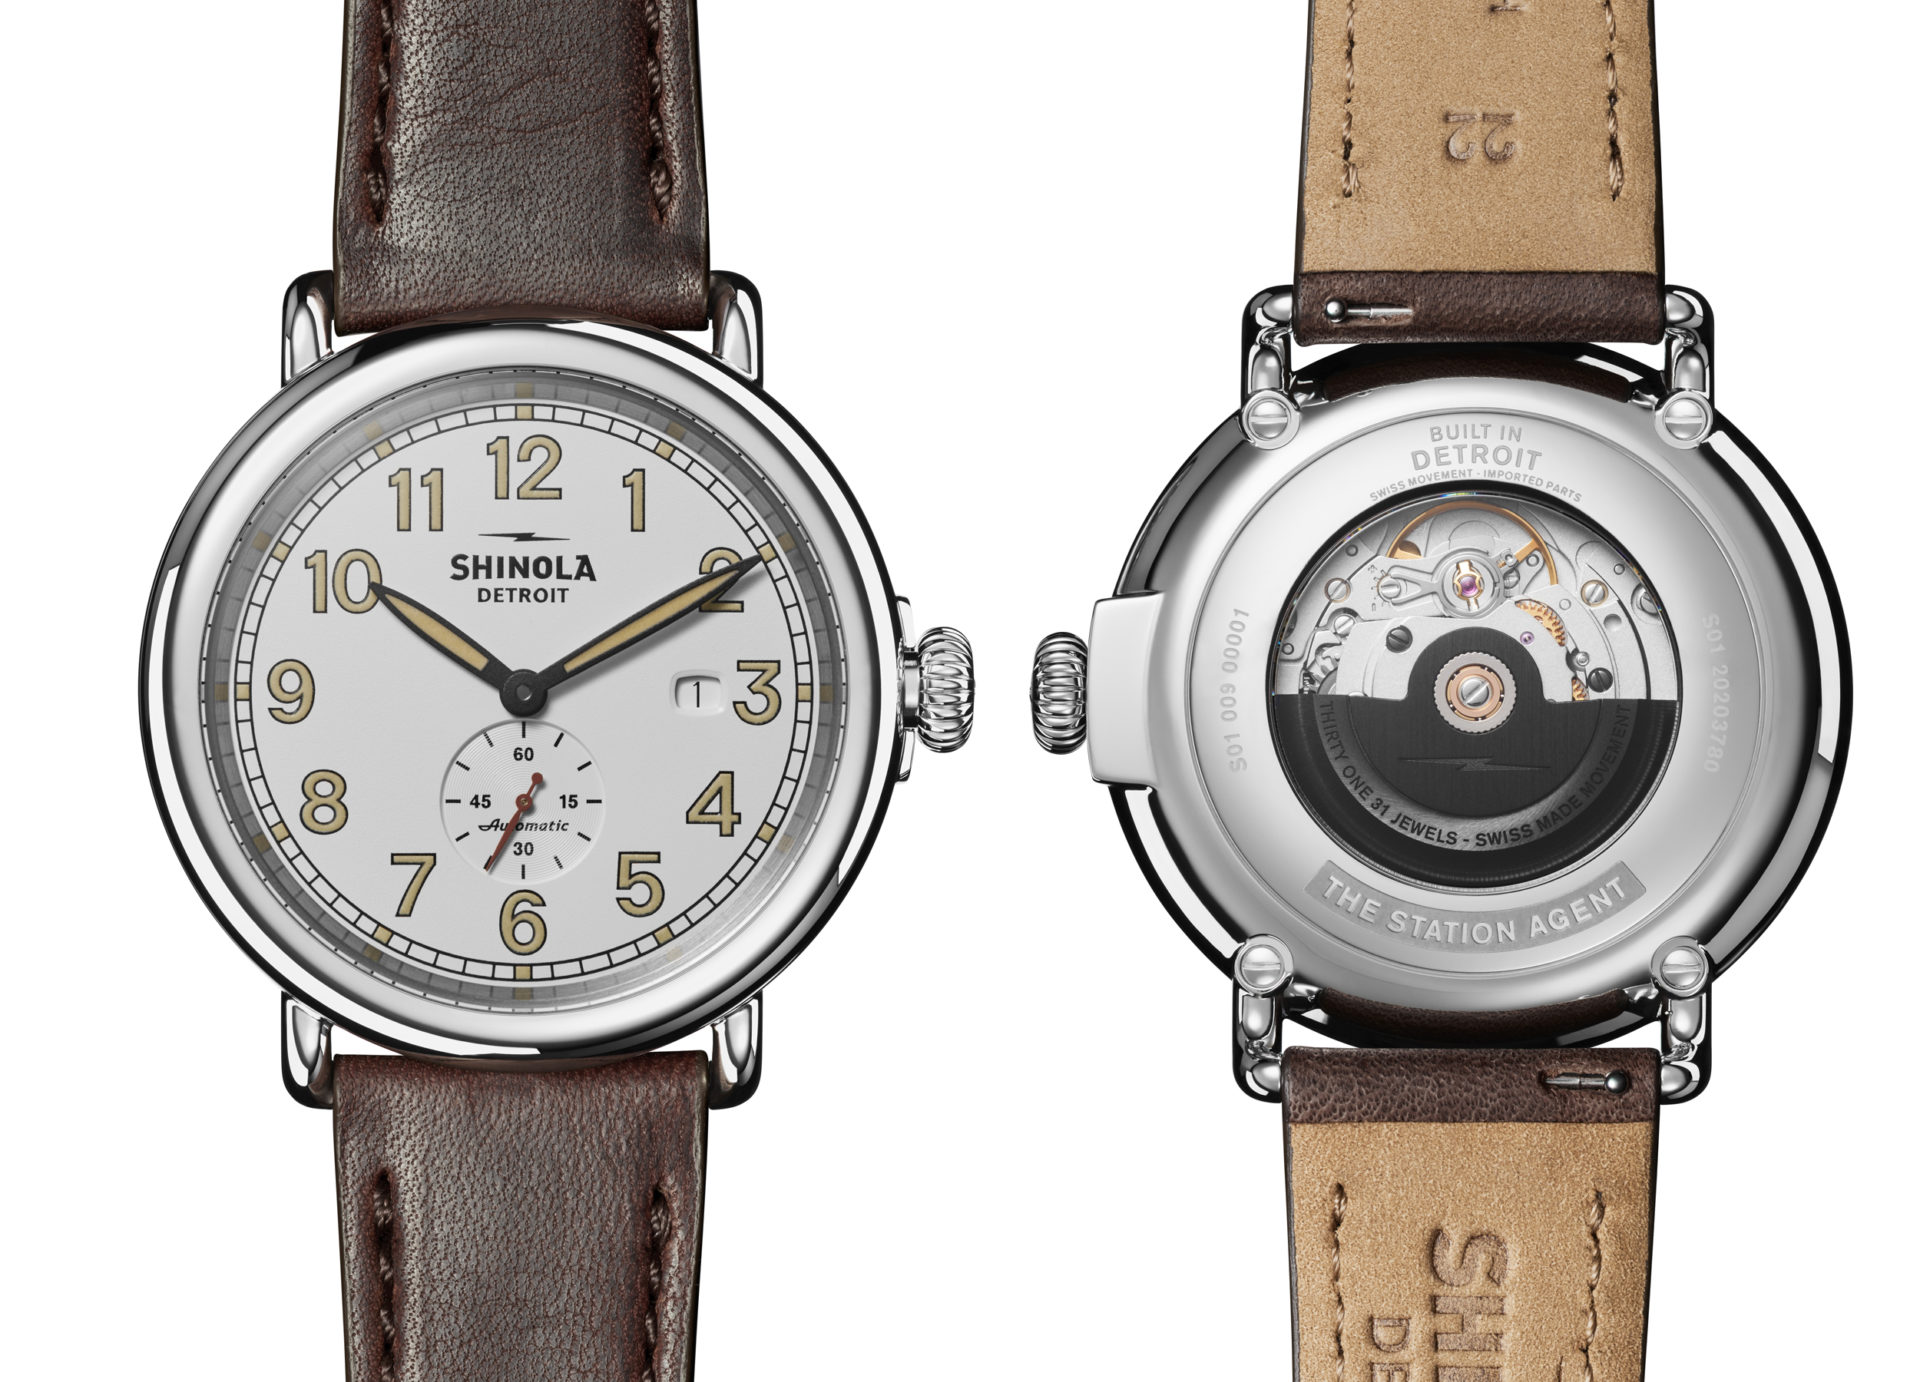 Shinola Watch Has Clear Case Back And And Small Seconds Subdial For The